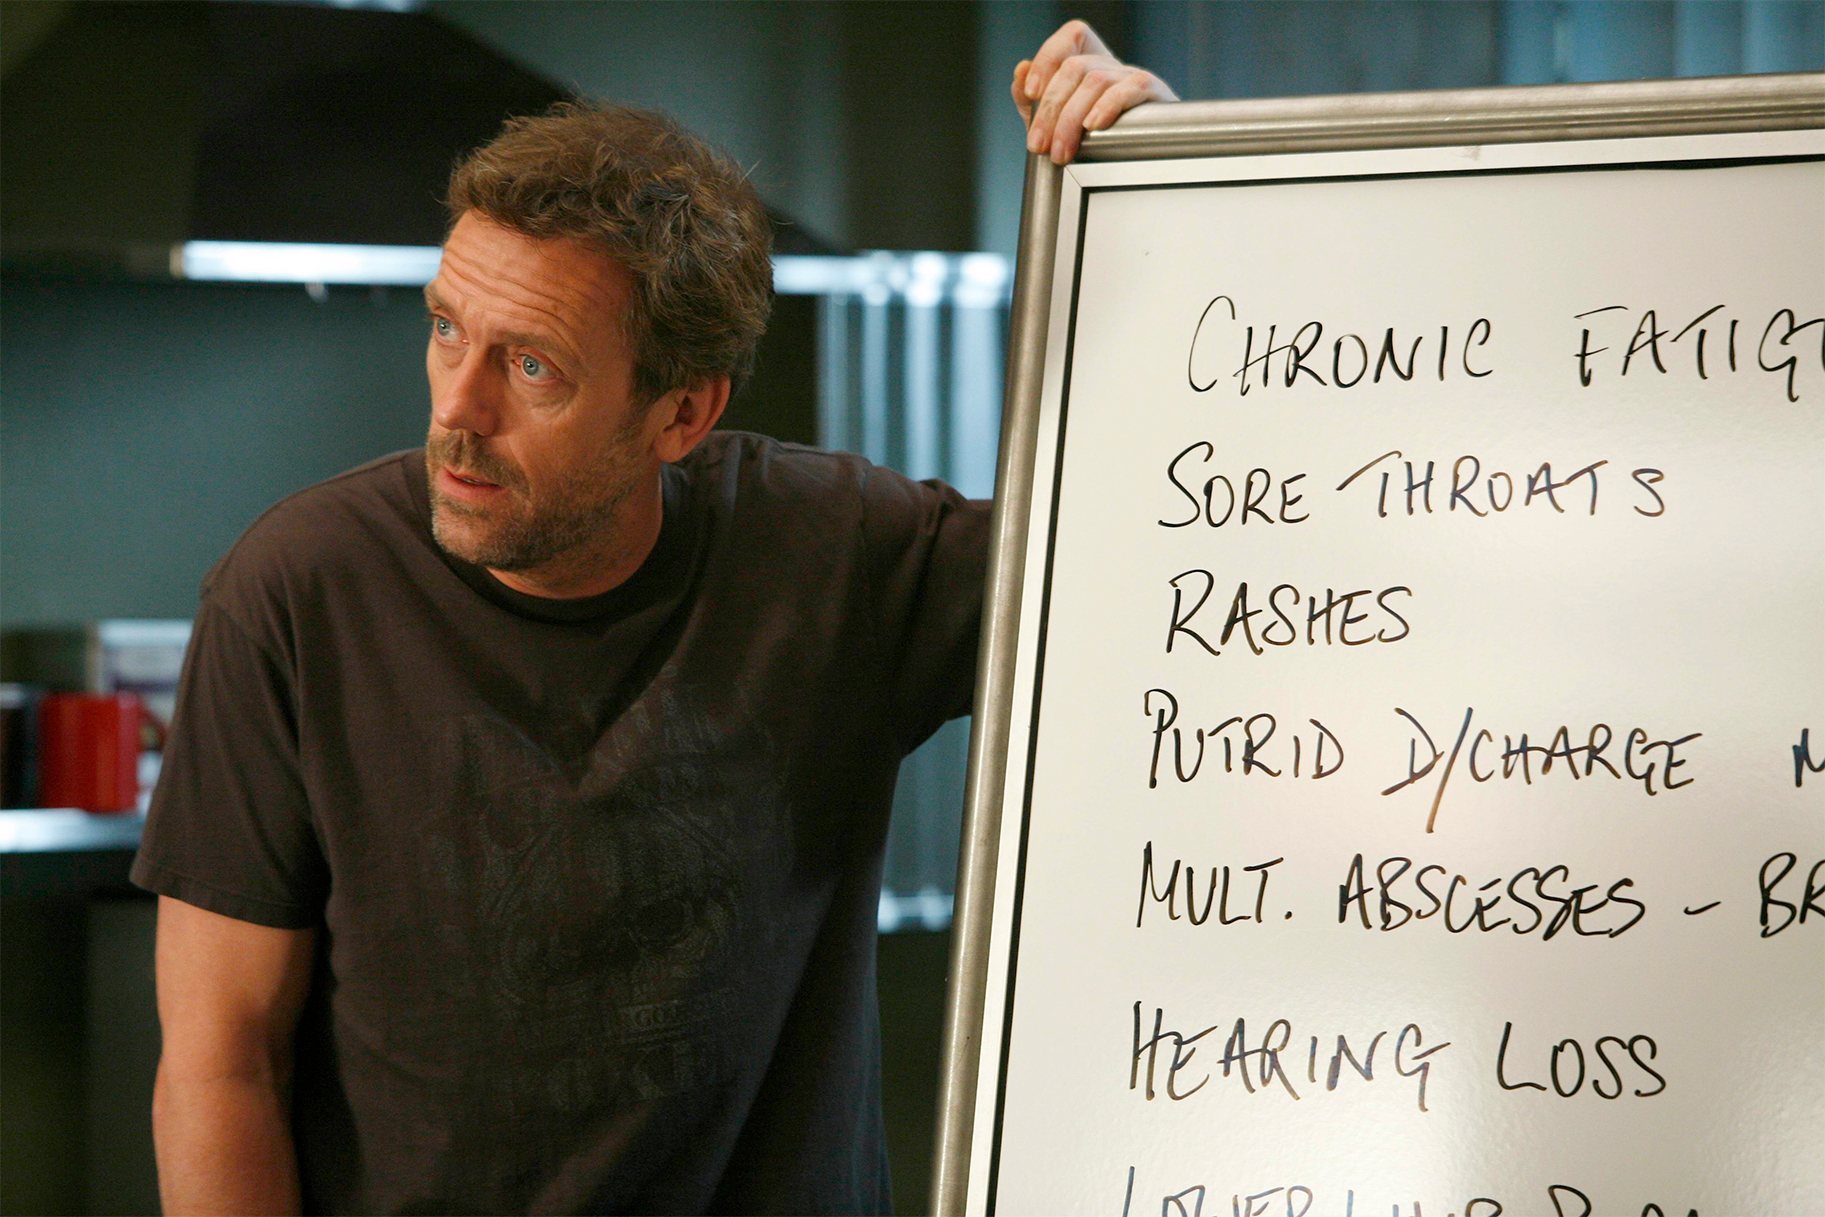 Dr Gregory House on House Episode 316